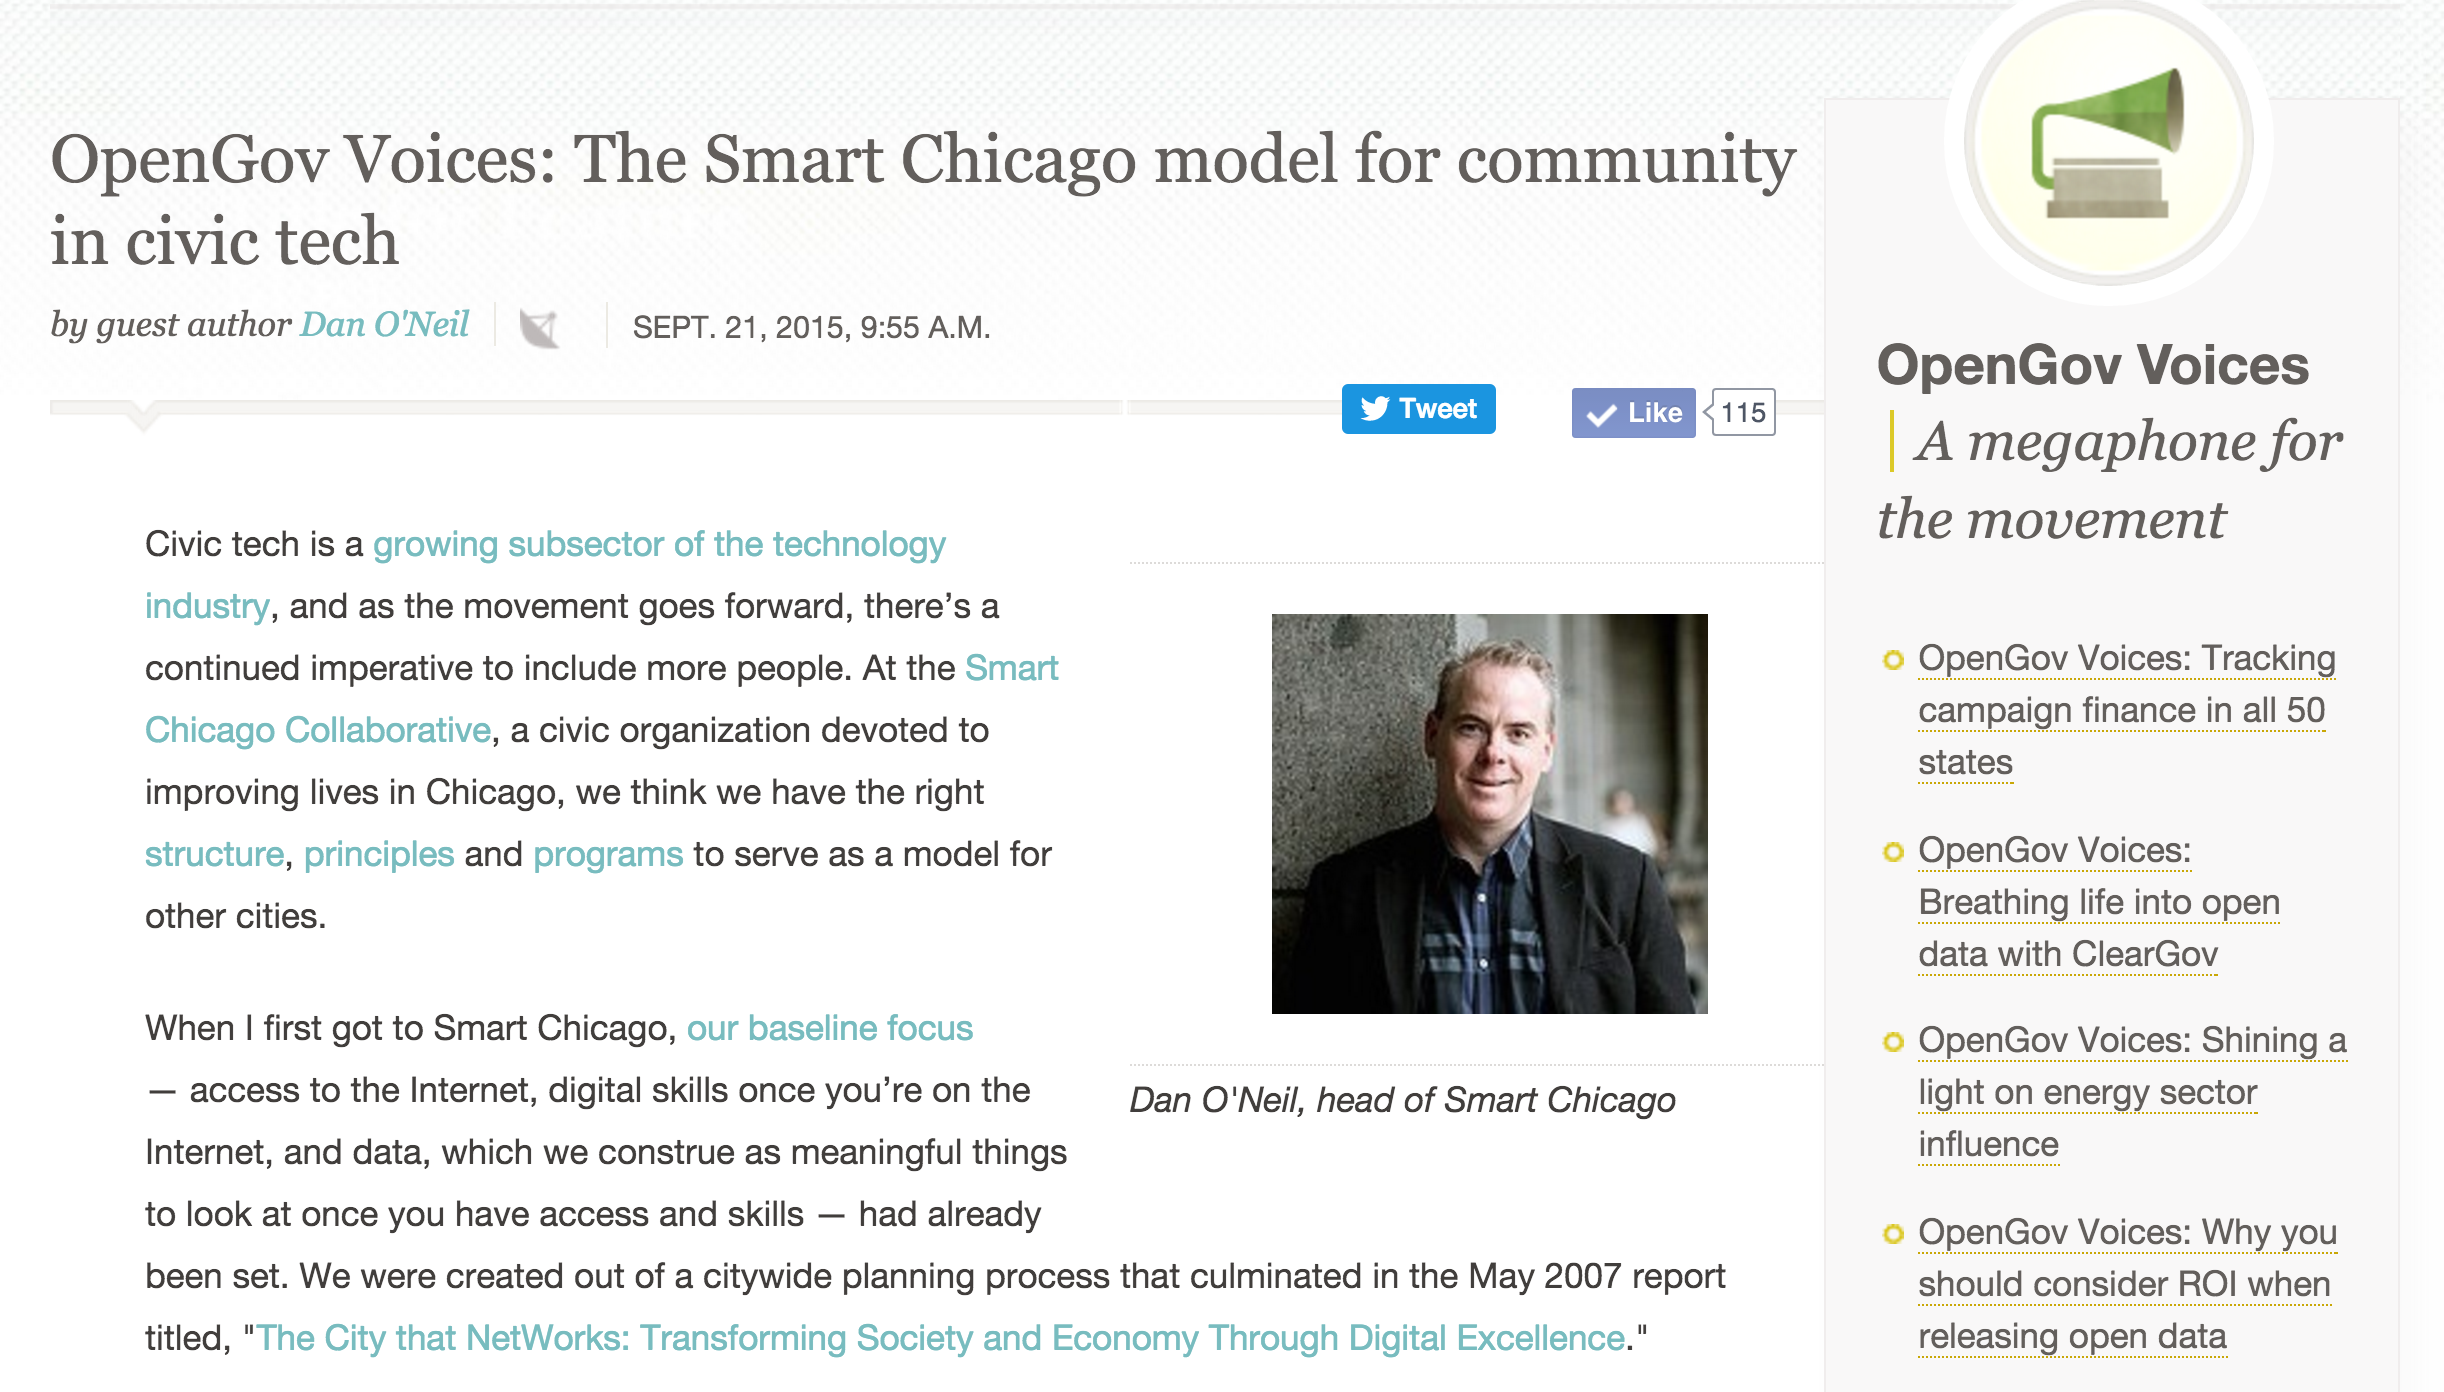 Writing: OpenGov Voices: The Smart Chicago model for community in civic tech